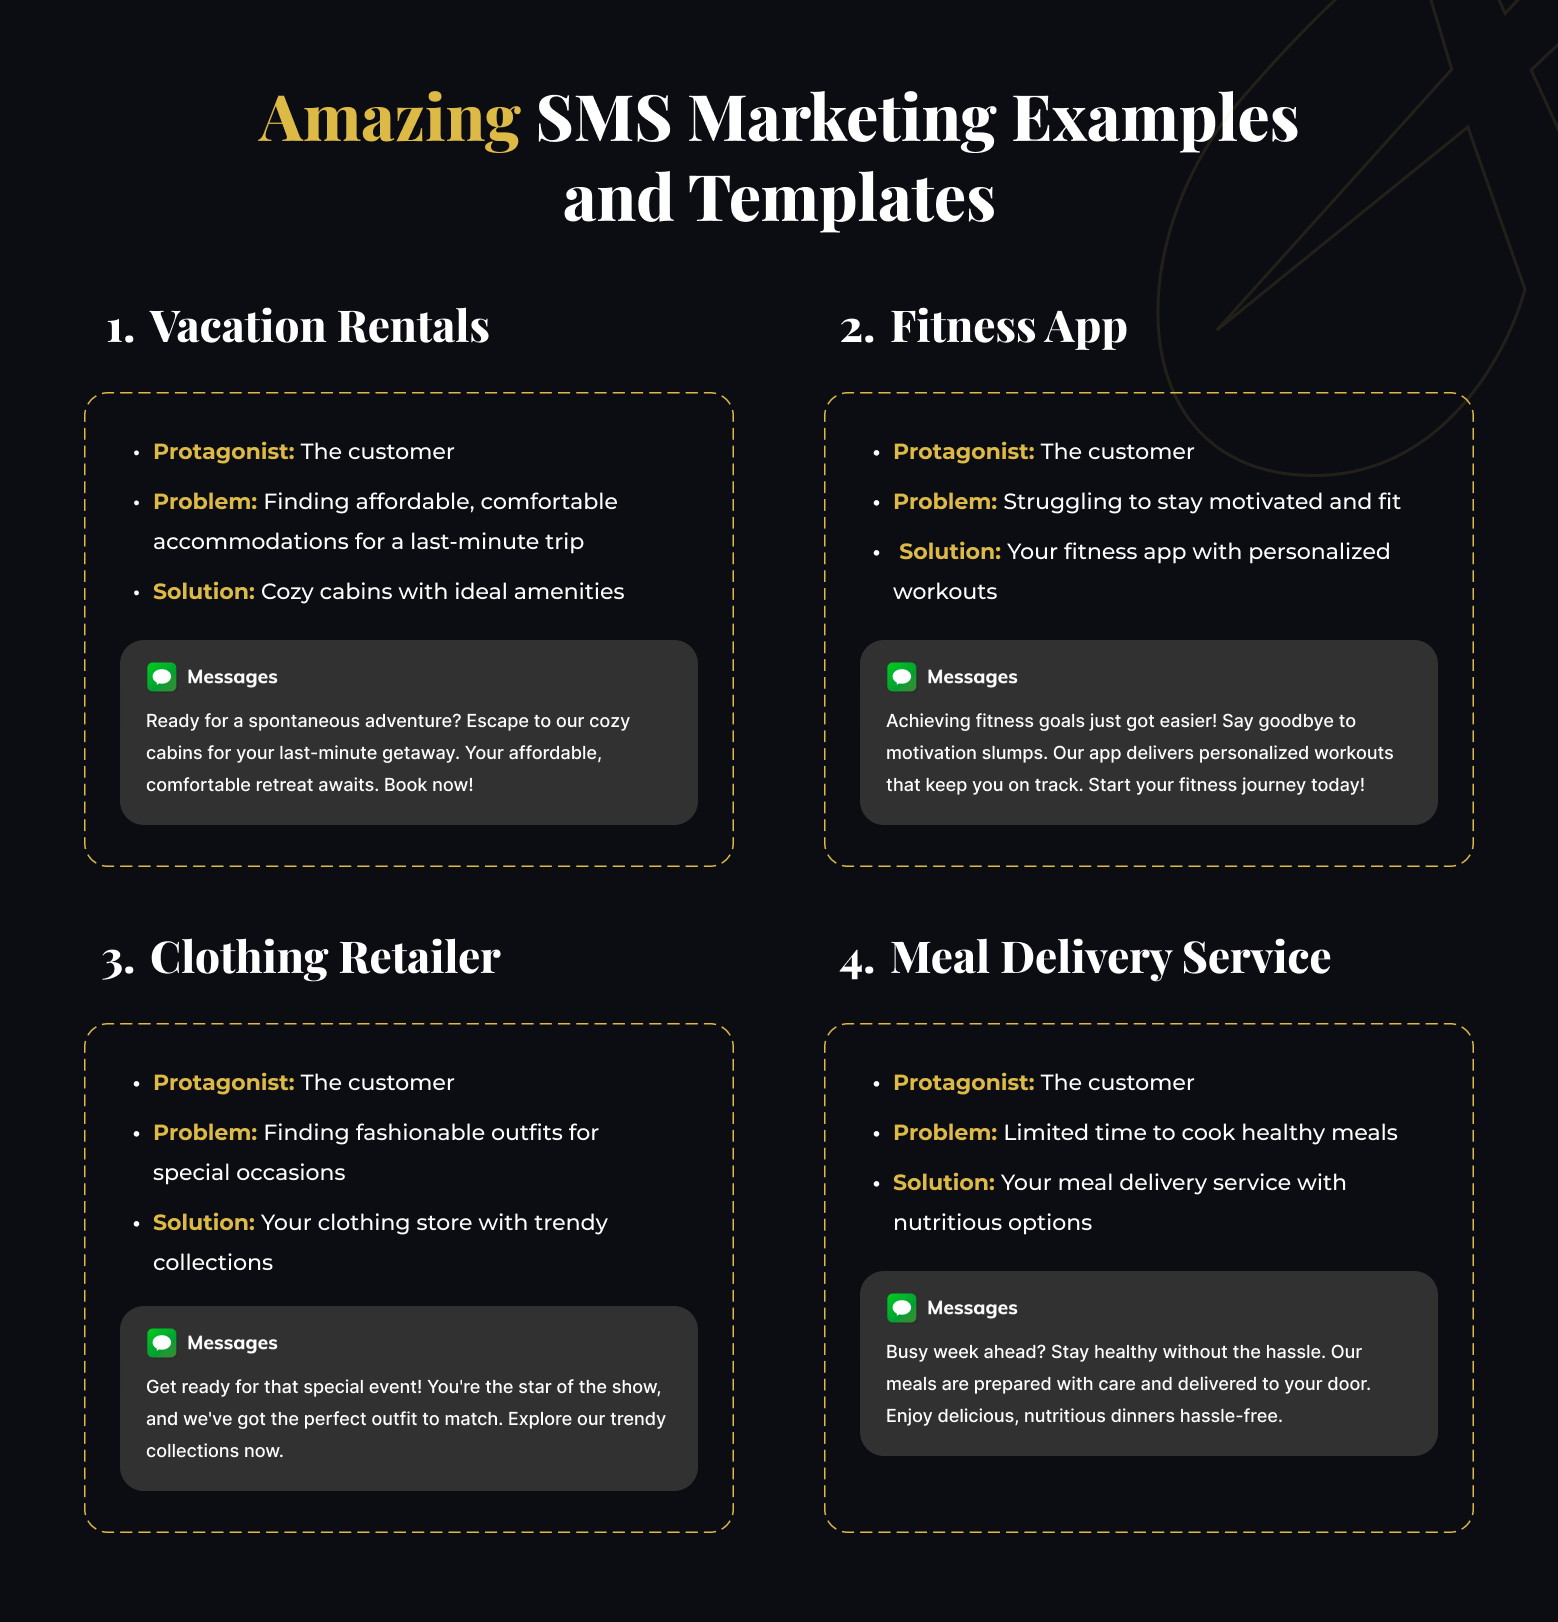 SMS marketing examples and templates